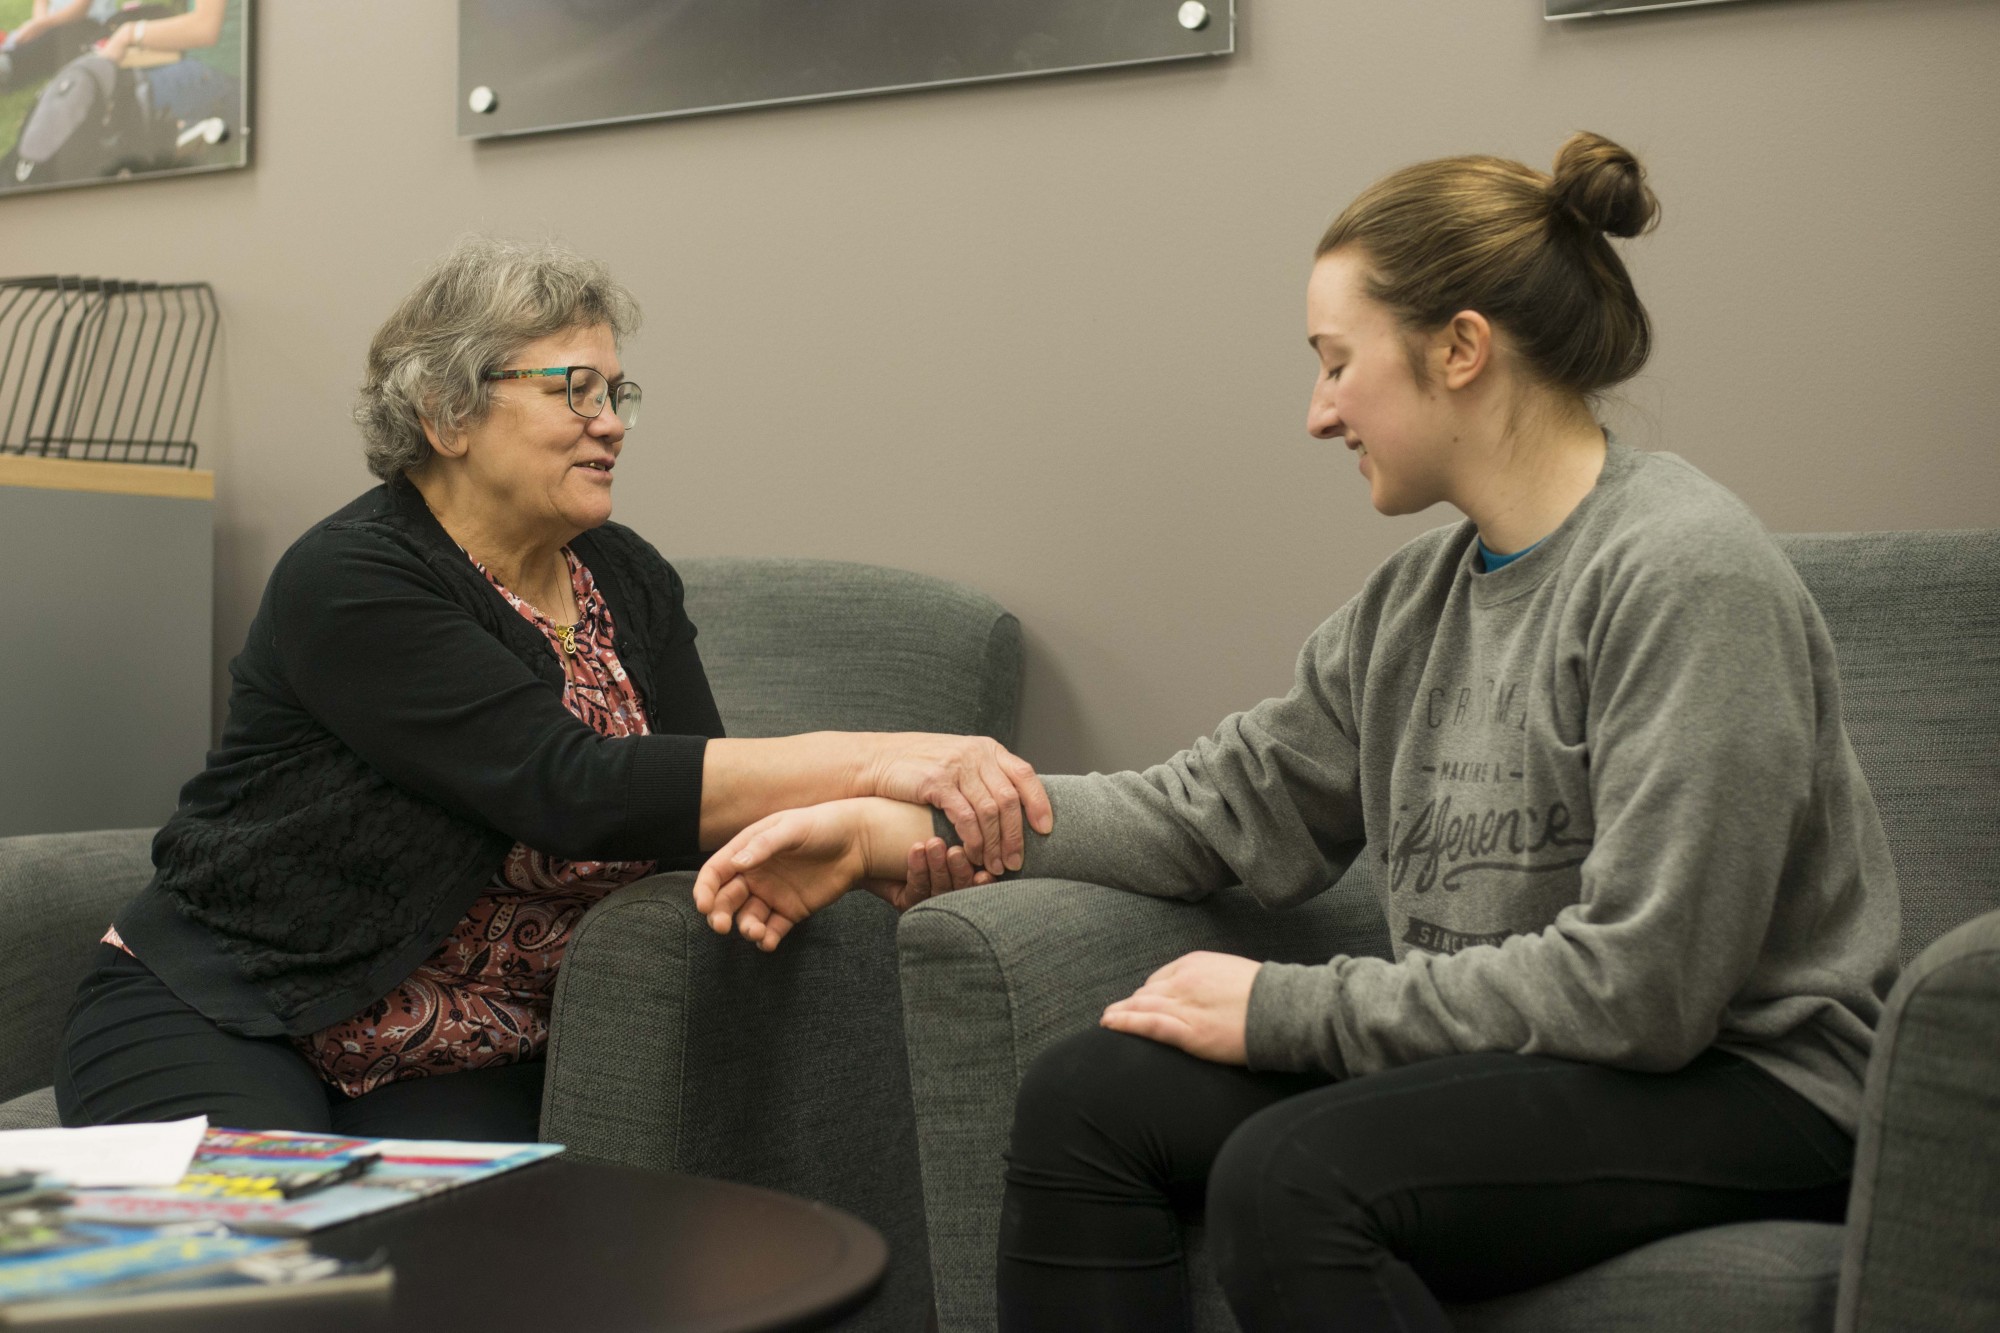 Massage therapist Ioana “Coca” Vladislav gives an impromptu hand massage to student Emily Clarke at the University Recreation and Wellness Center on Monday, Nov. 11. Vladislav is known as “Grandma Coca” and has been working at the U for 20 years.